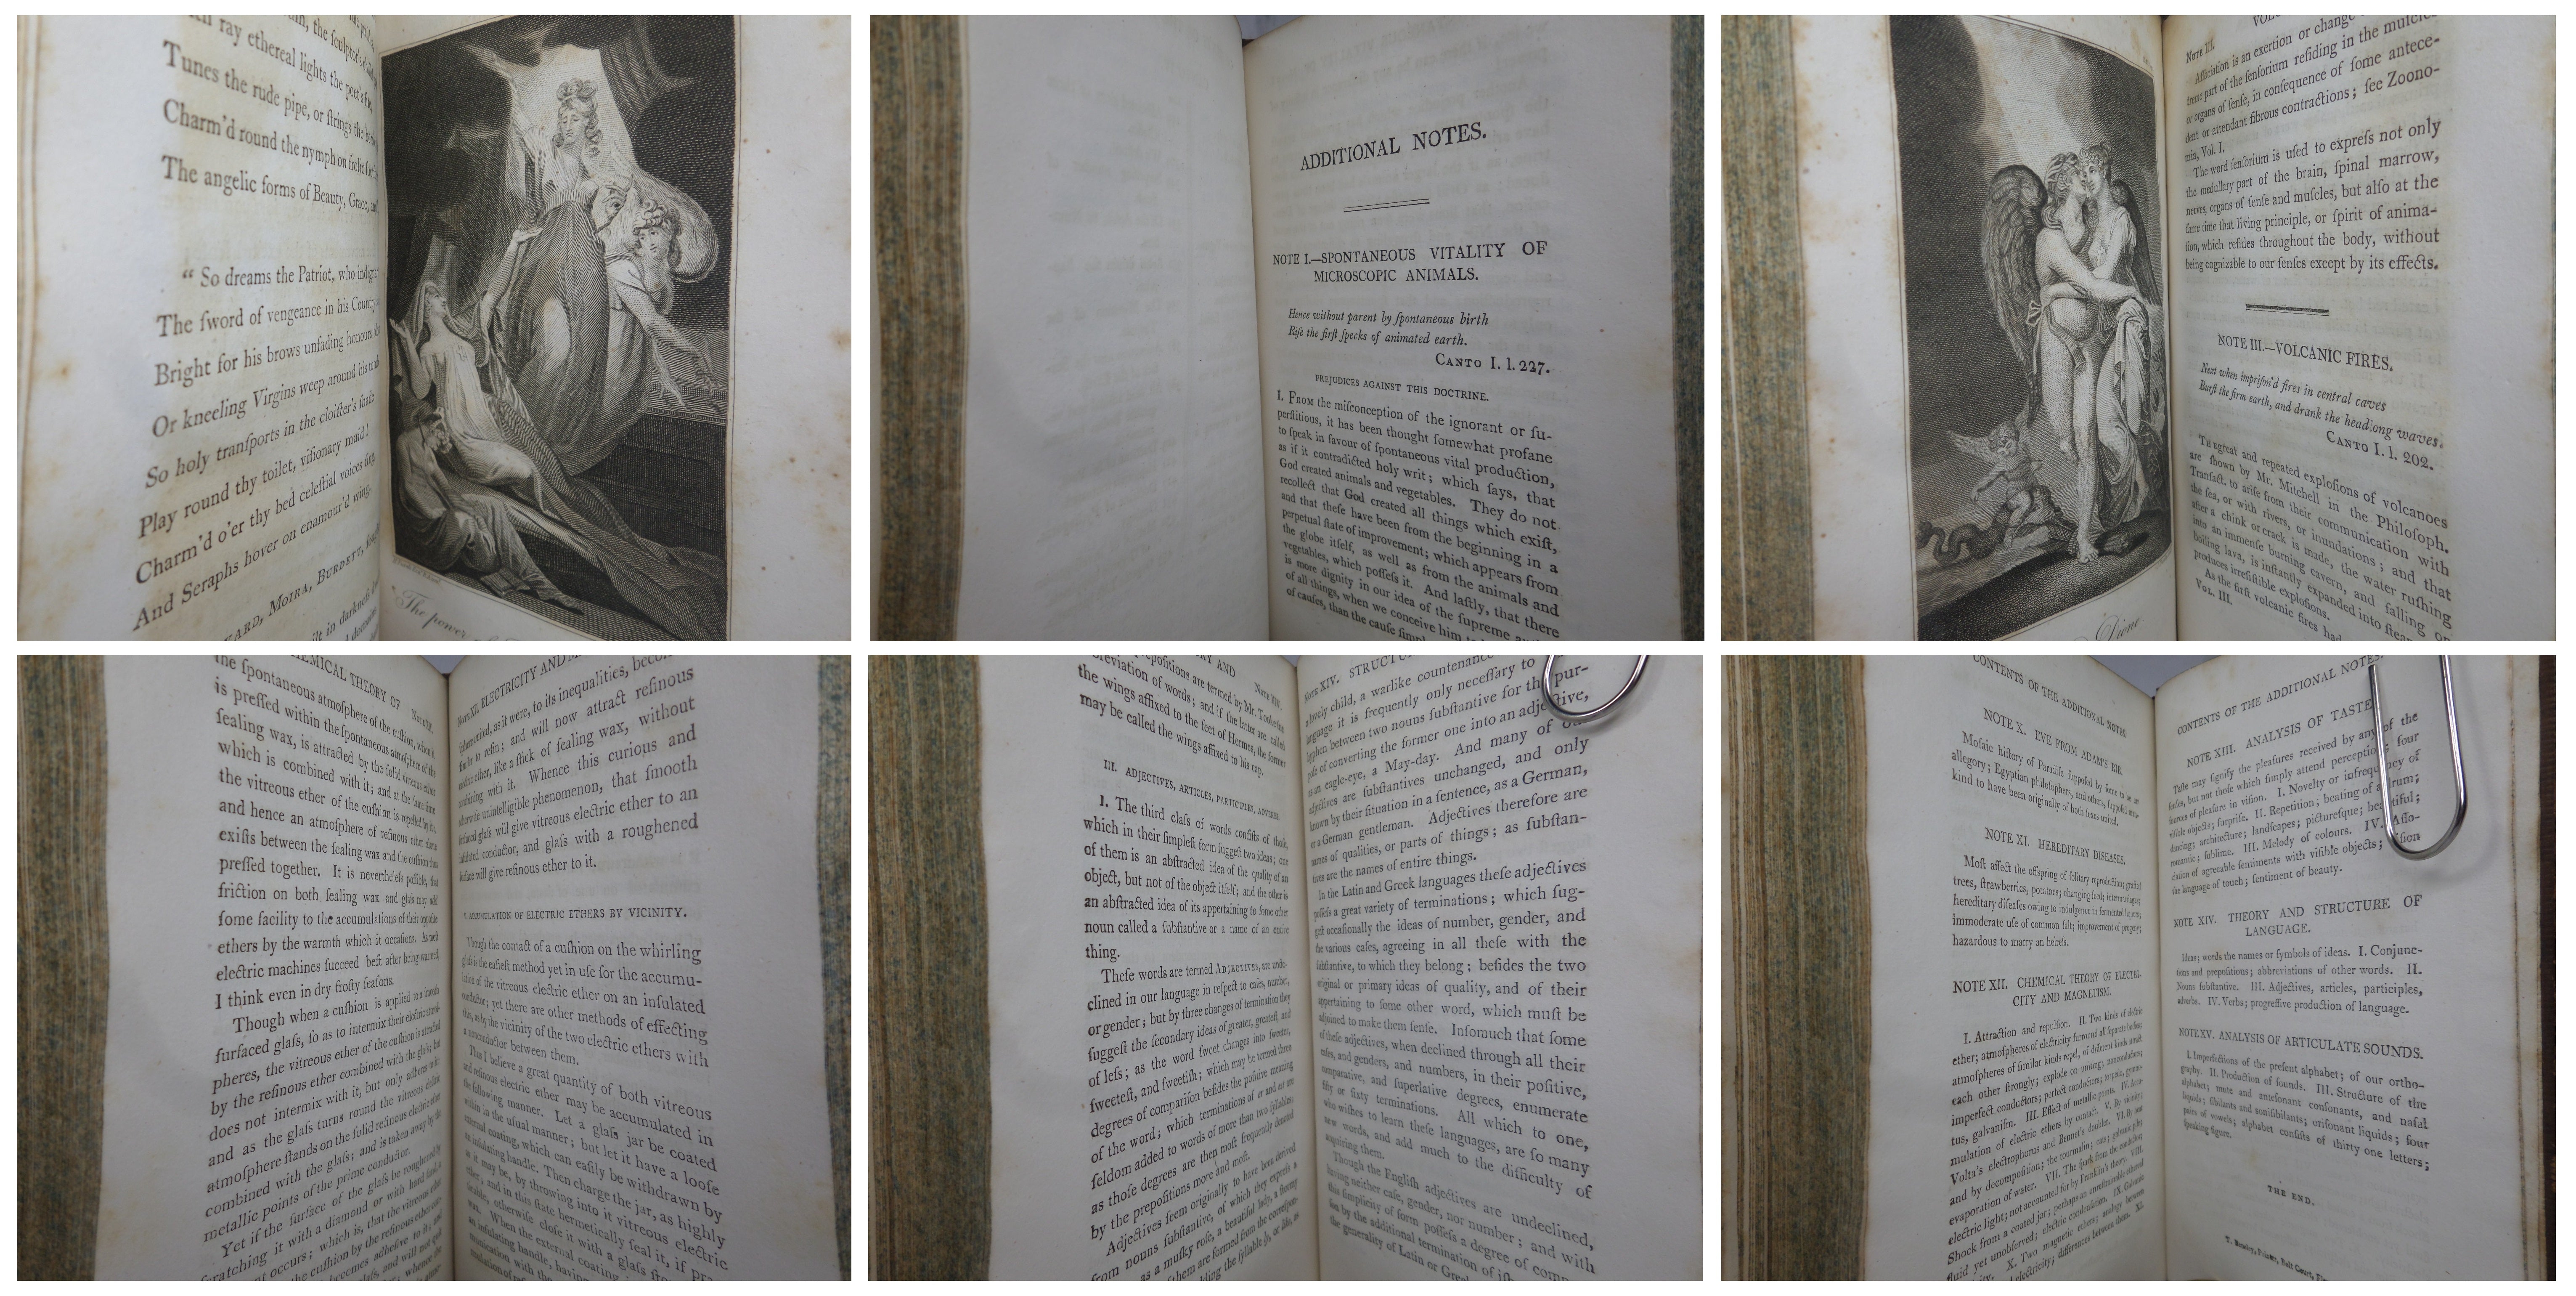 THE POETICAL WORKS OF ERASMUS DARWIN 1806 FIRST EDITION IN THREE VOLUMES, WILLIAM BLAKE ILLUSTRATIONS